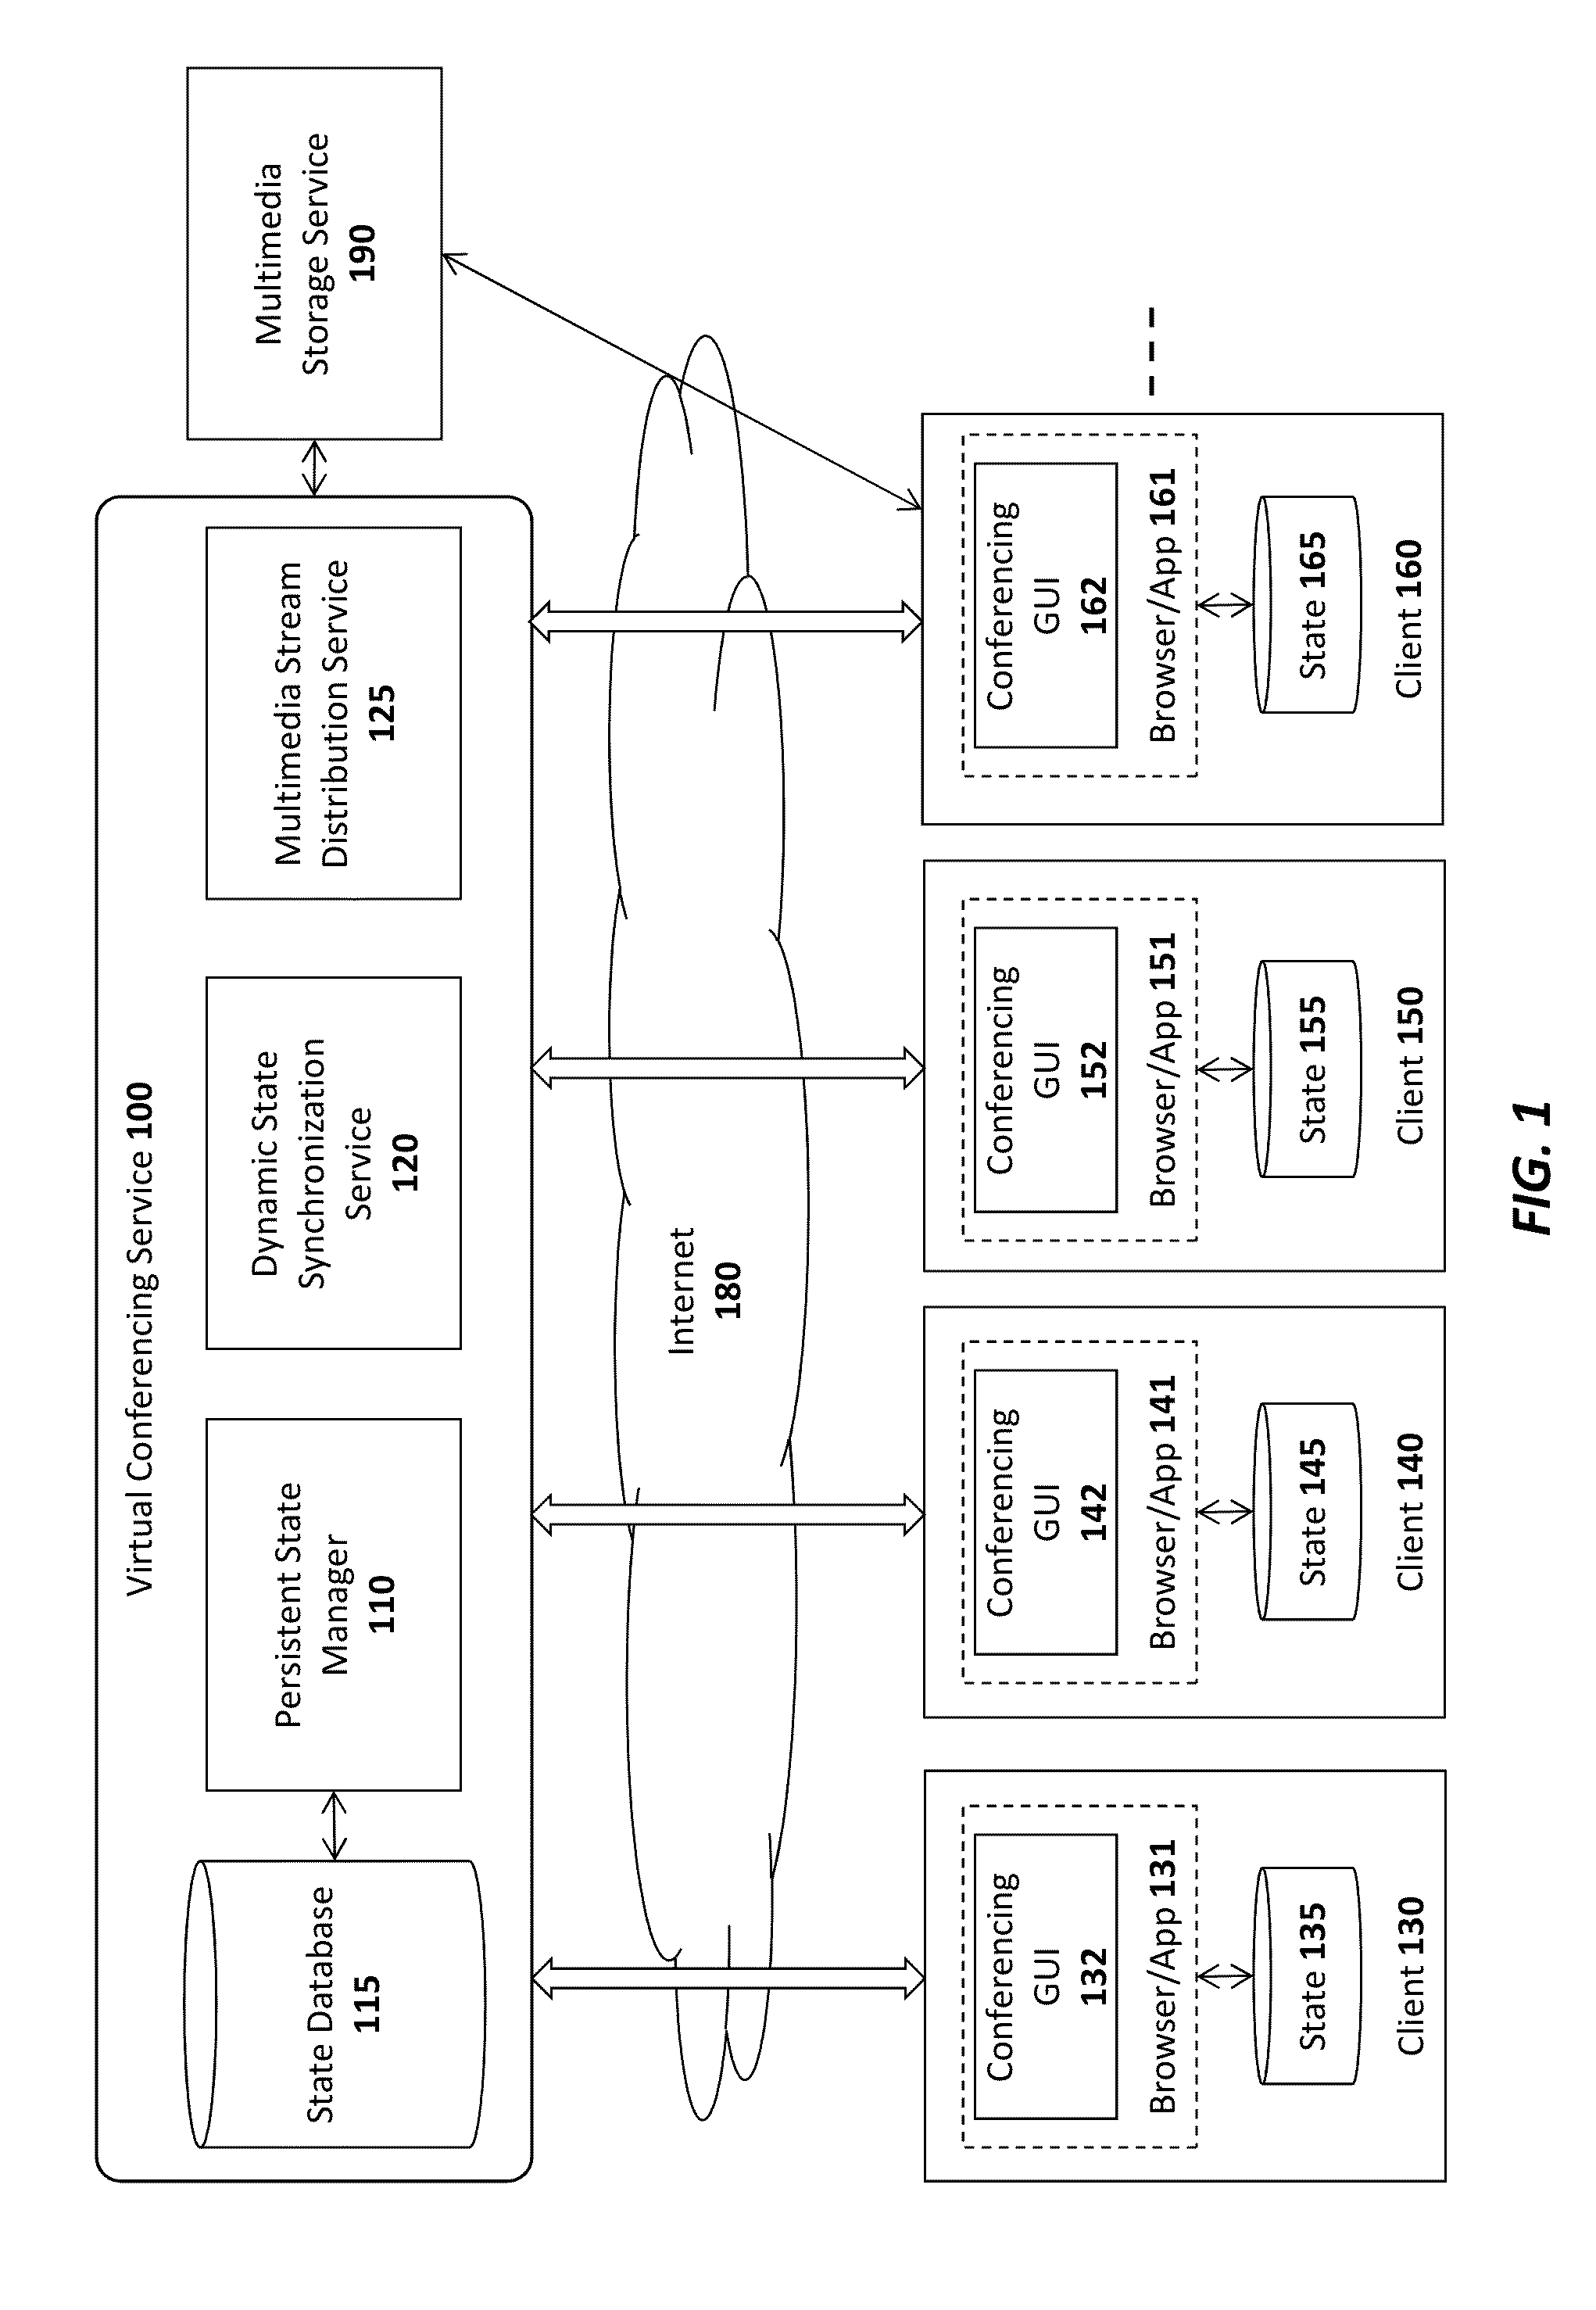 System and method for managing virtual conferencing breakout groups